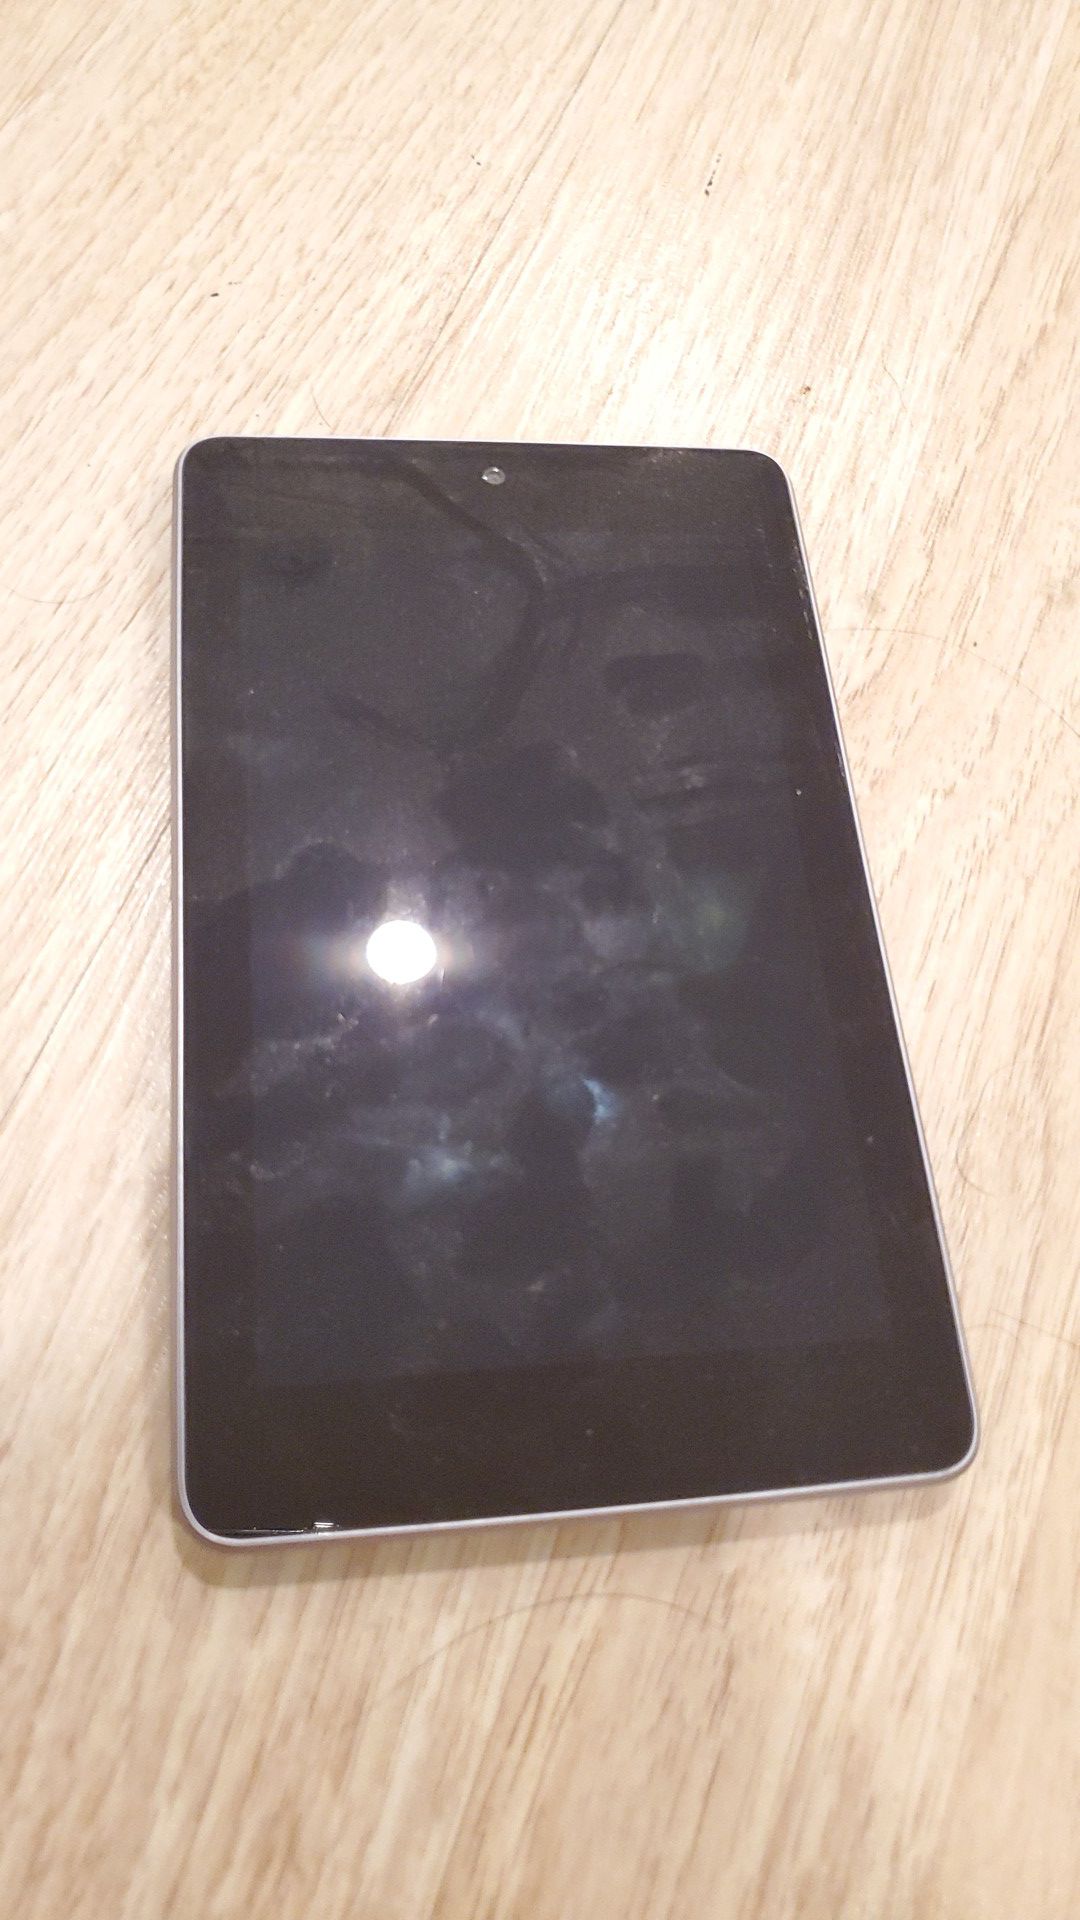 Nexus 7 in tablet new like condition